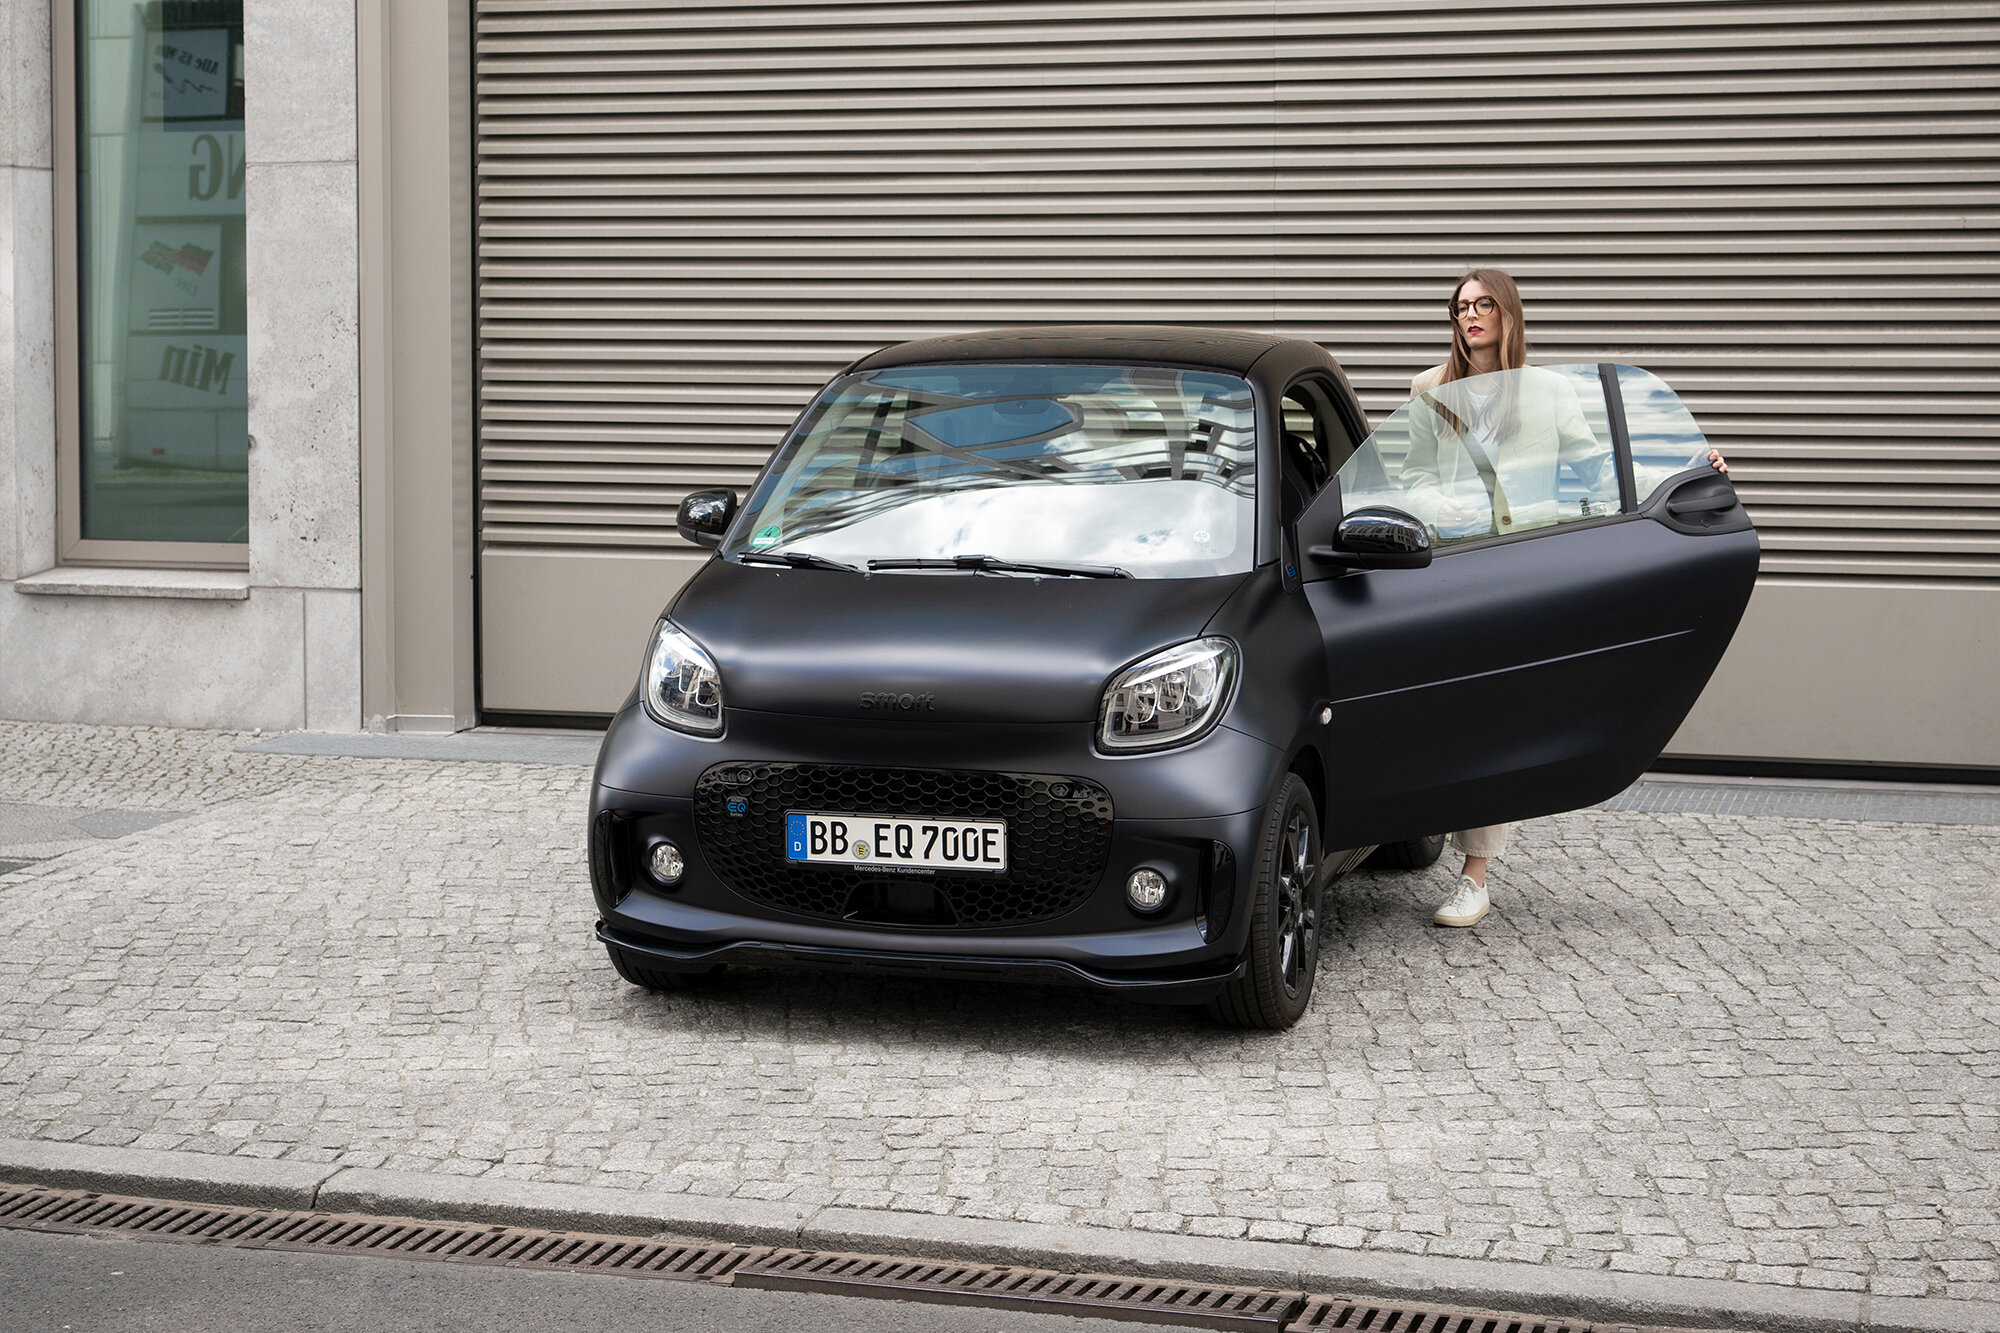 Founder of ellectric Britta Reineke on tour with the smart EQ fortwo limited edition bluedawn